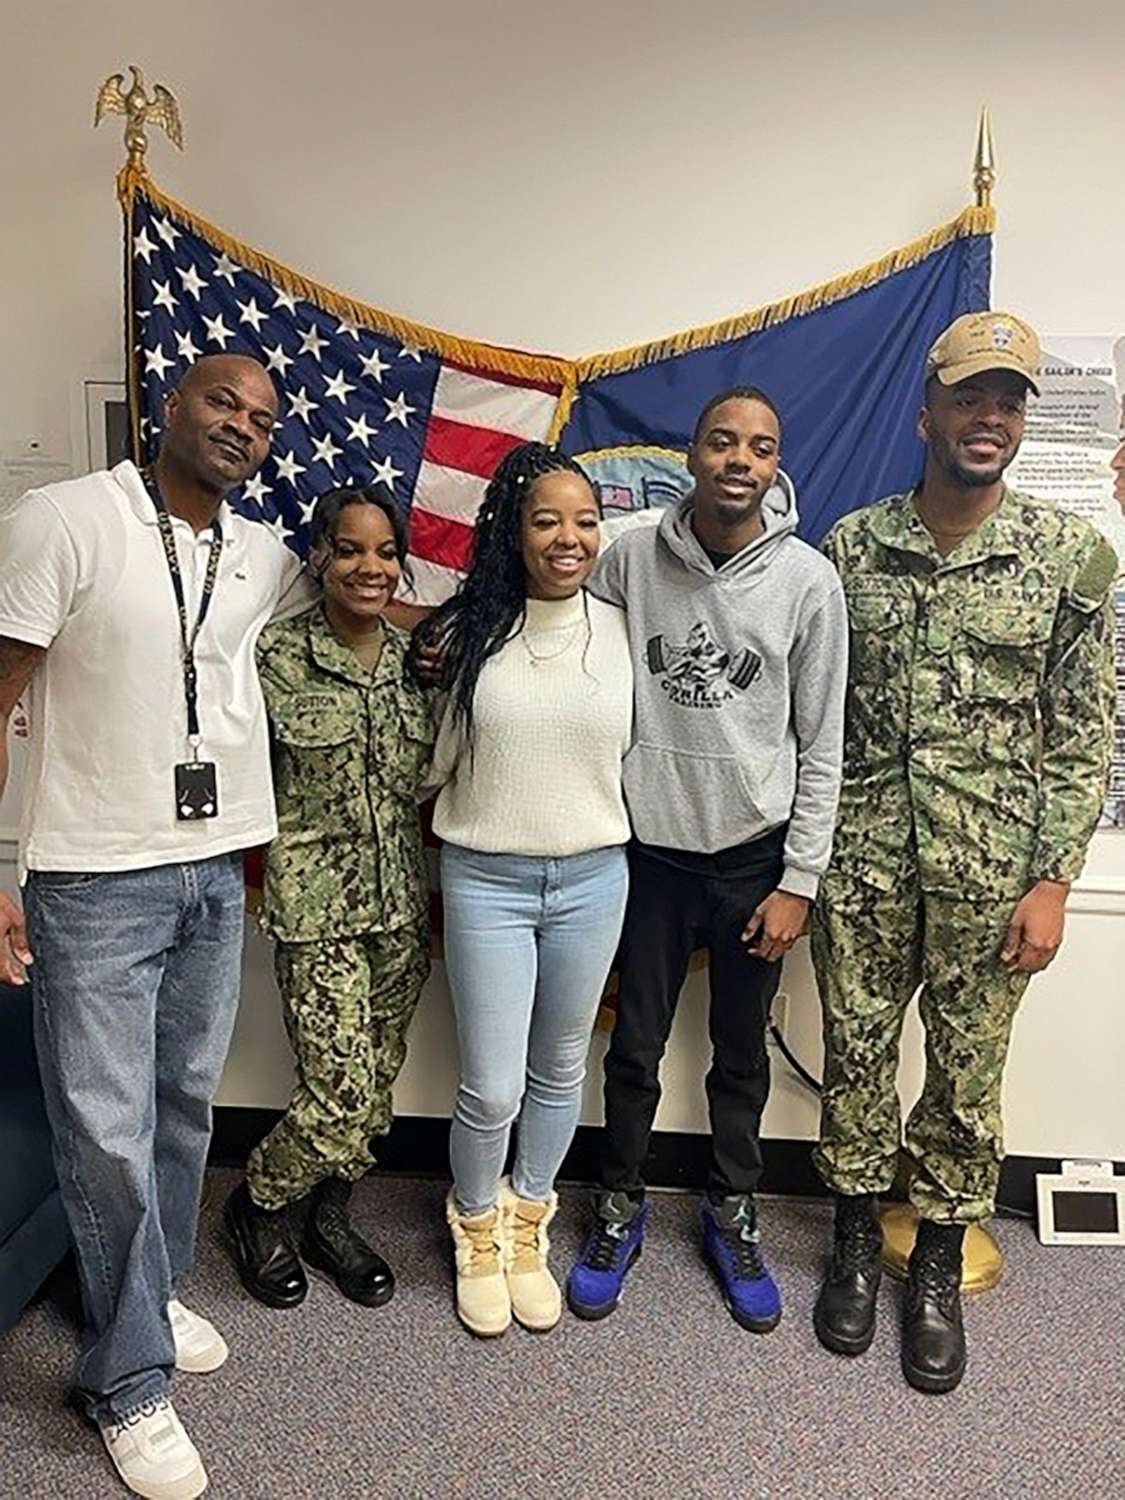 PHOTO: Andrea, Adrion, and Ayrion Sutton are the first Black triplets to enlist in the Navy together.